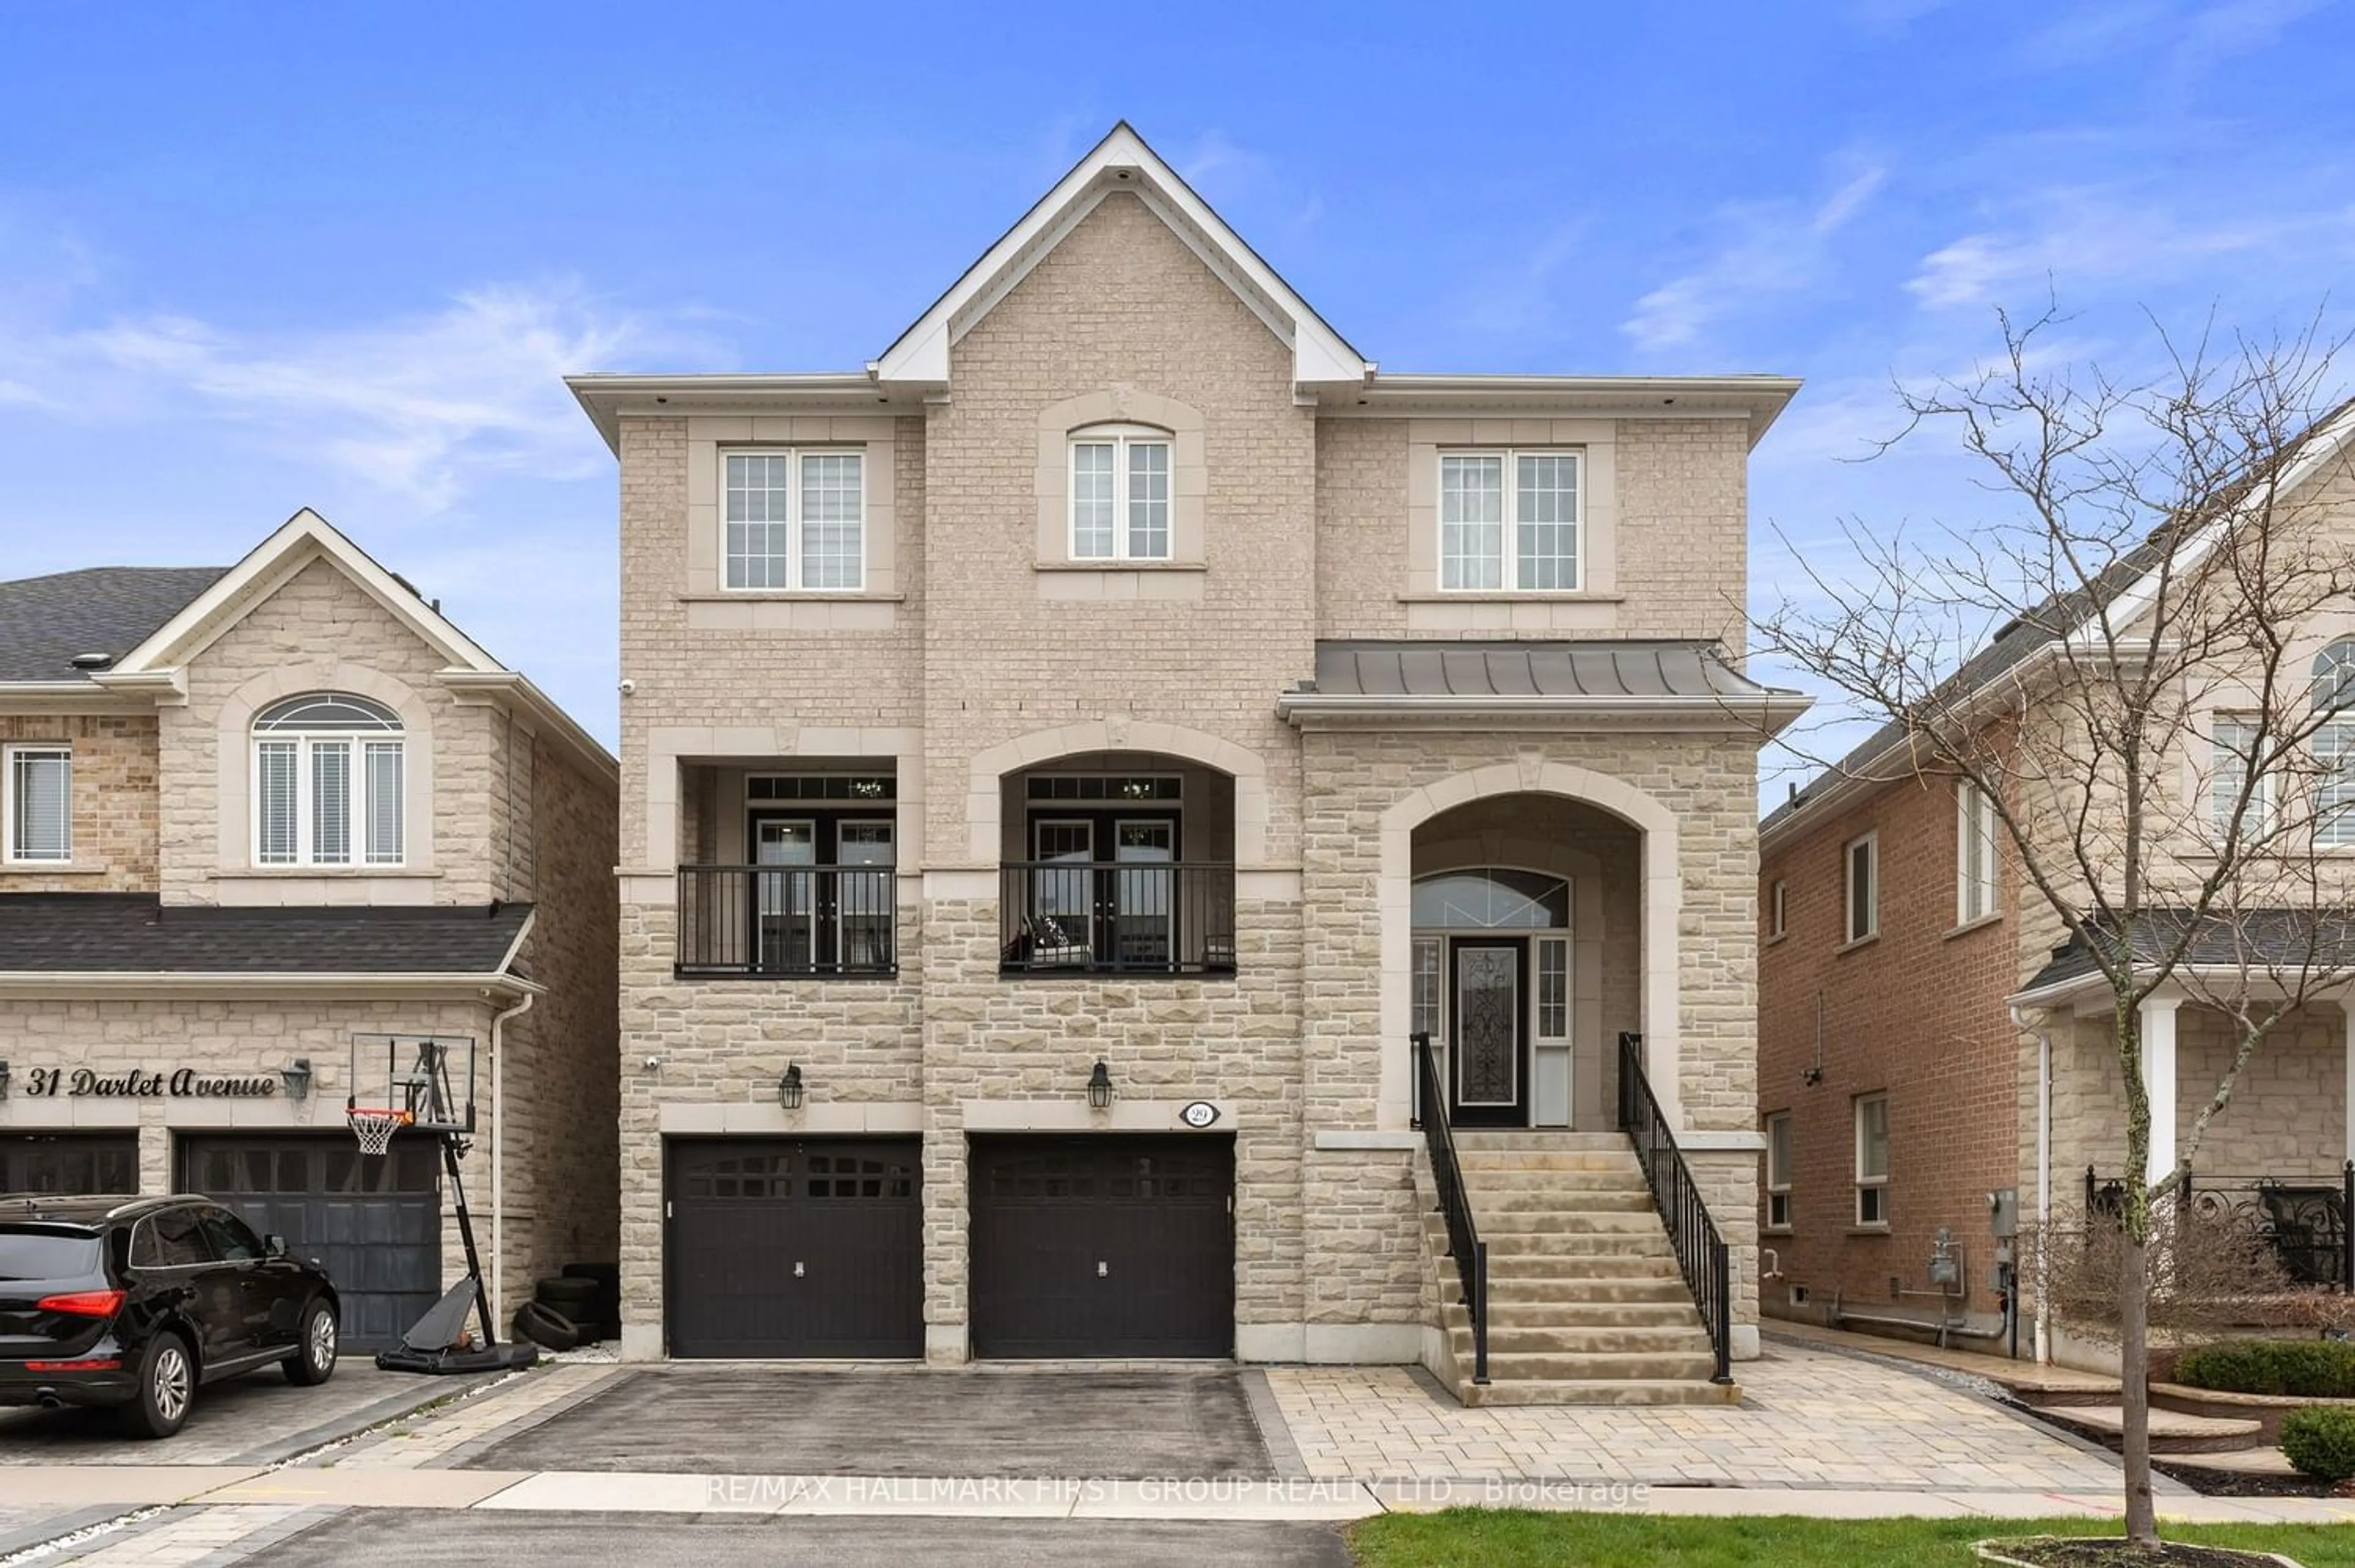 Home with brick exterior material for 29 Darlet Ave, Ajax Ontario L1Z 0G4